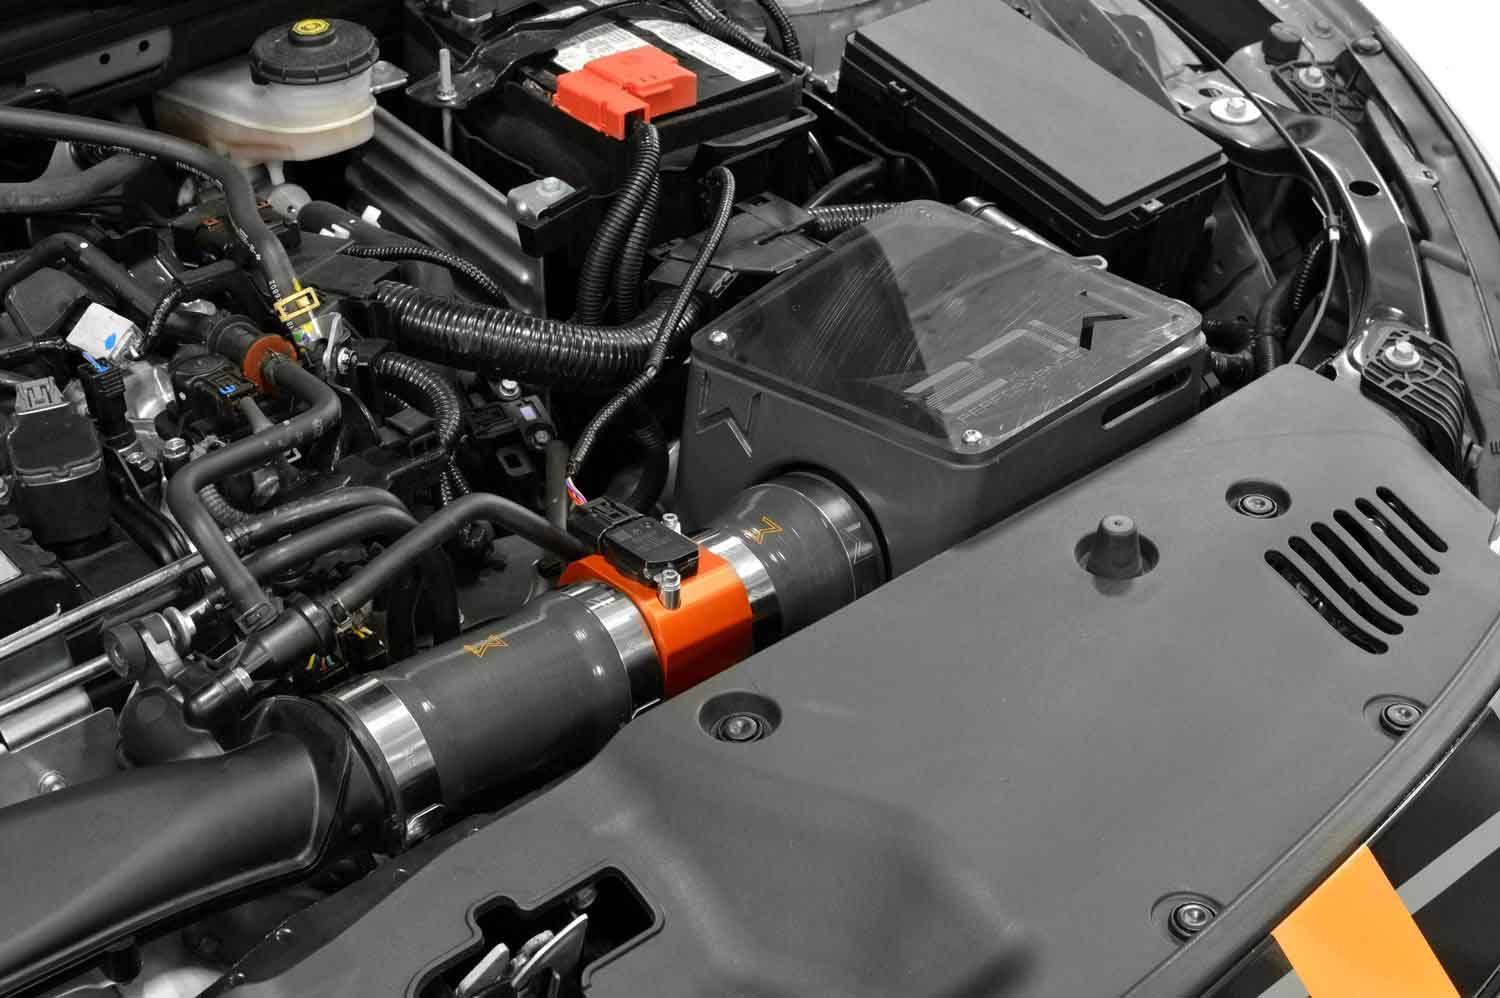 cold-air-intake-for-honda-civic-si-installed-on-car